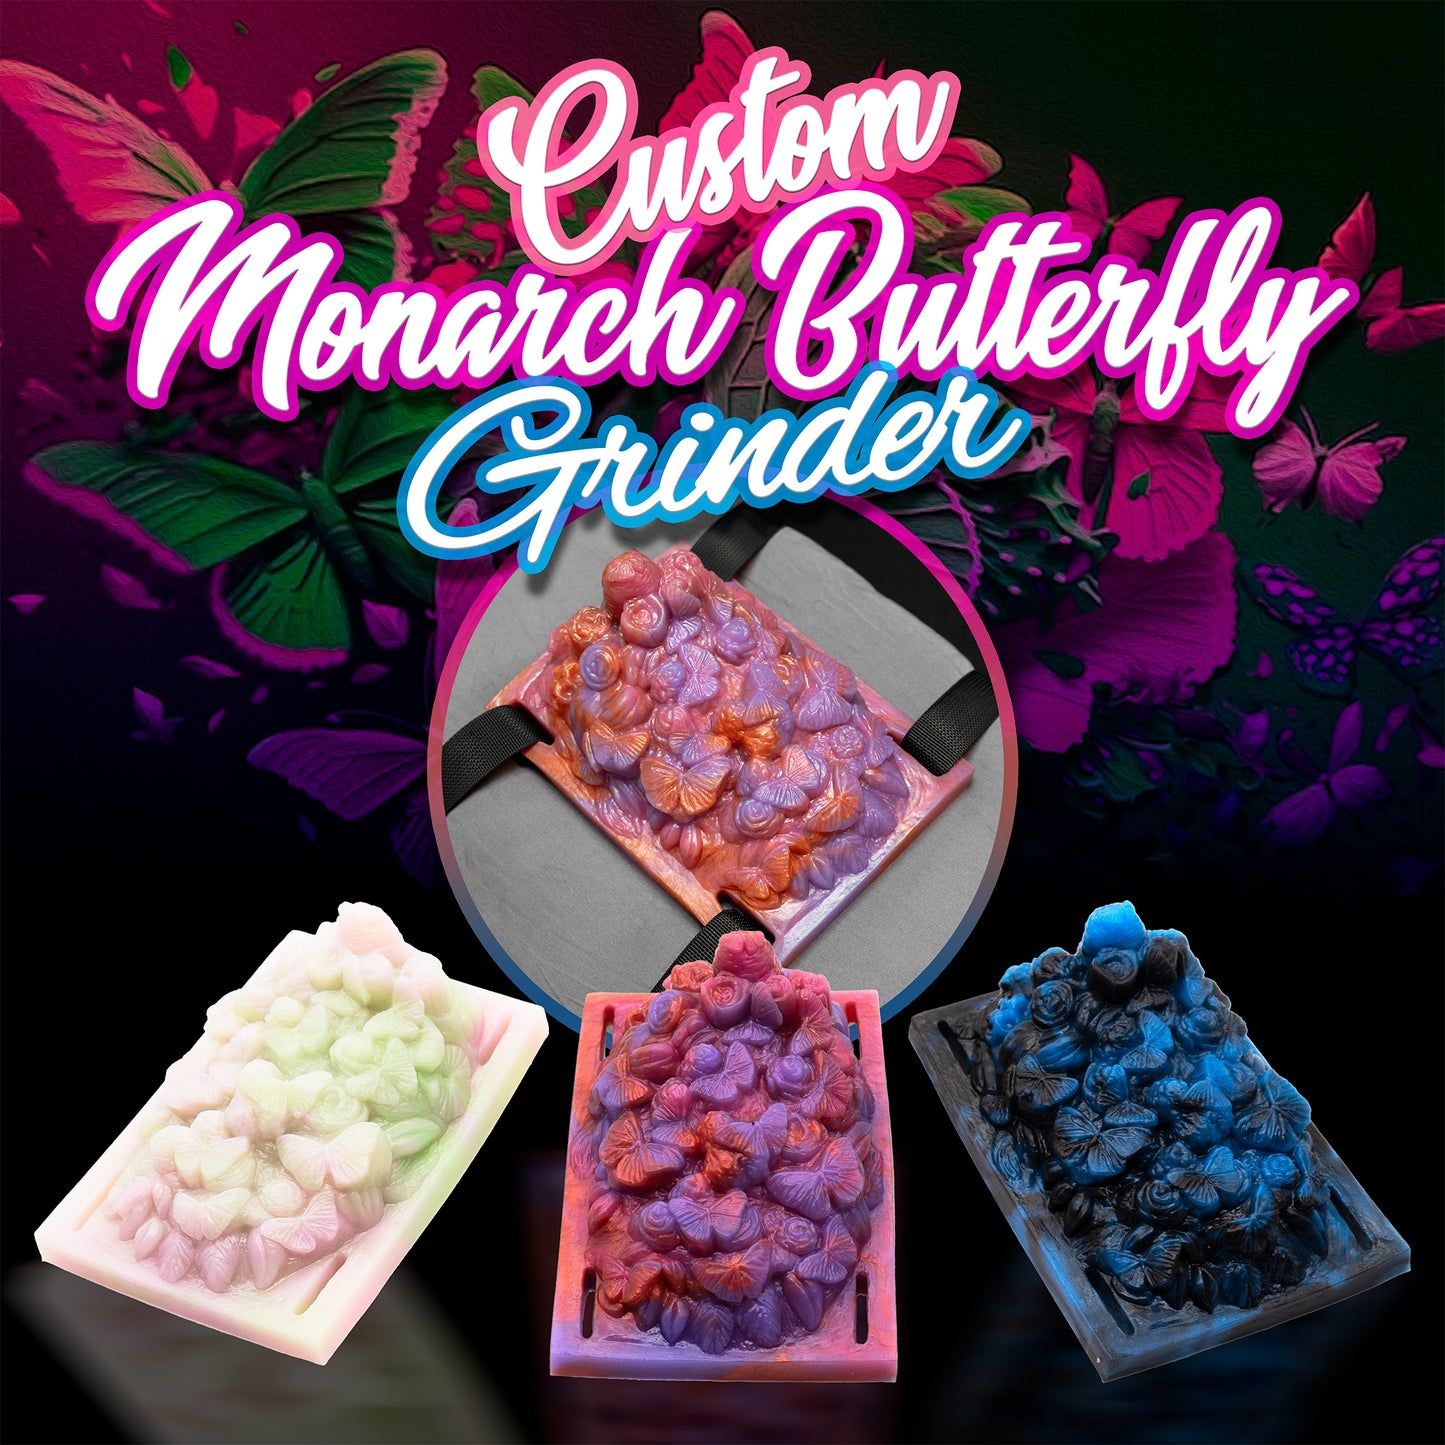 Hump, rub and grind with our butterfly-themed grinder sex toy. Our grinder sex toys strap securely to any pillow, rolled-up towel or blanket for your solo play adventures.  Customize your own grinder sex toy - choose colors, style, and firmness. 